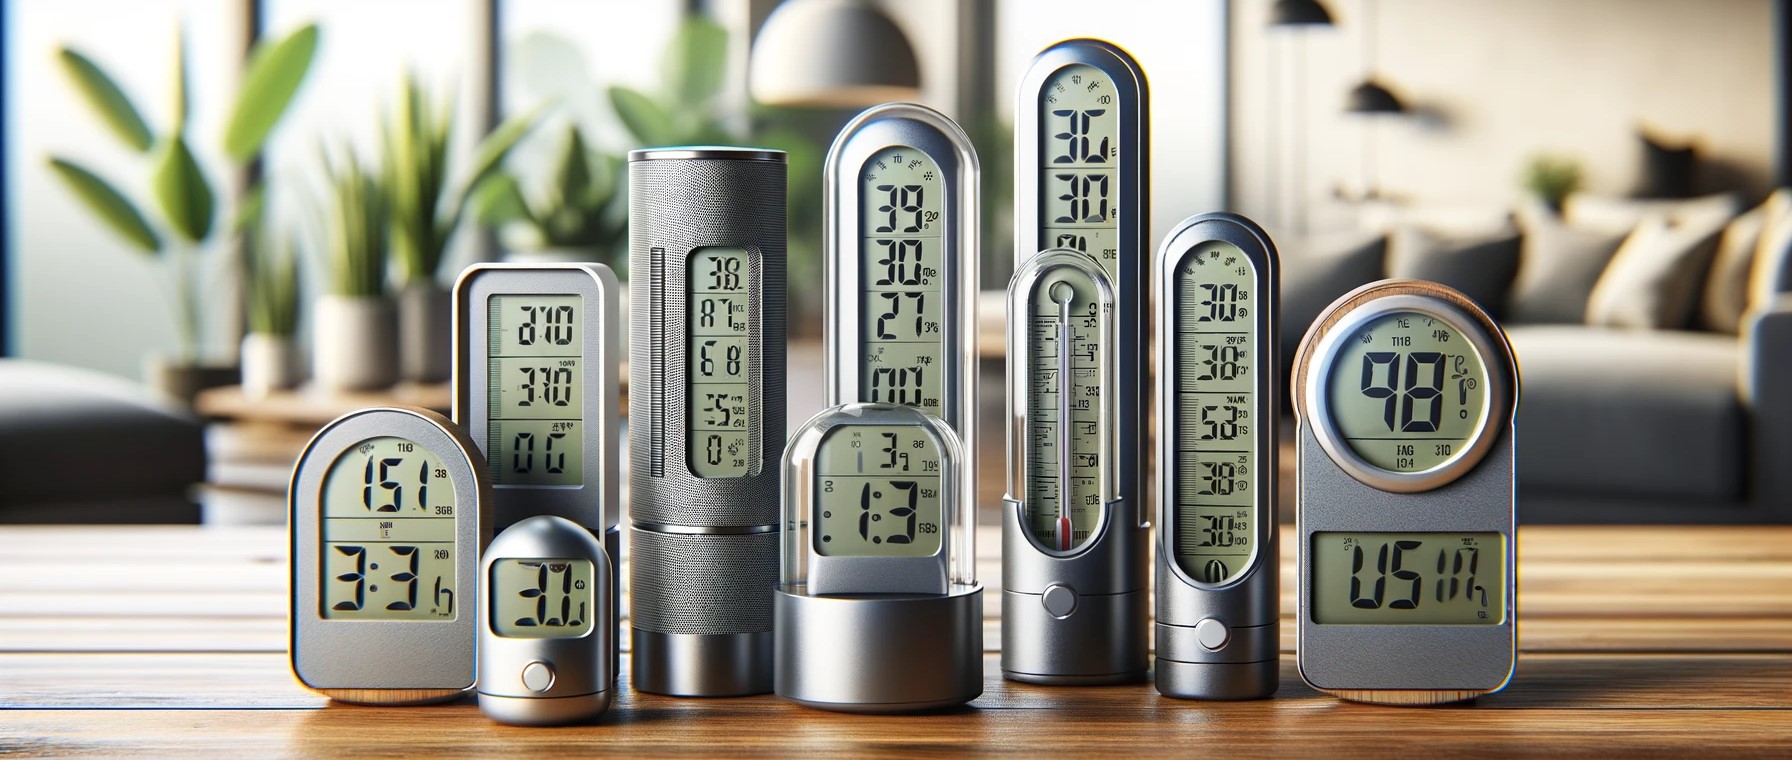 best thermo-hygrometers